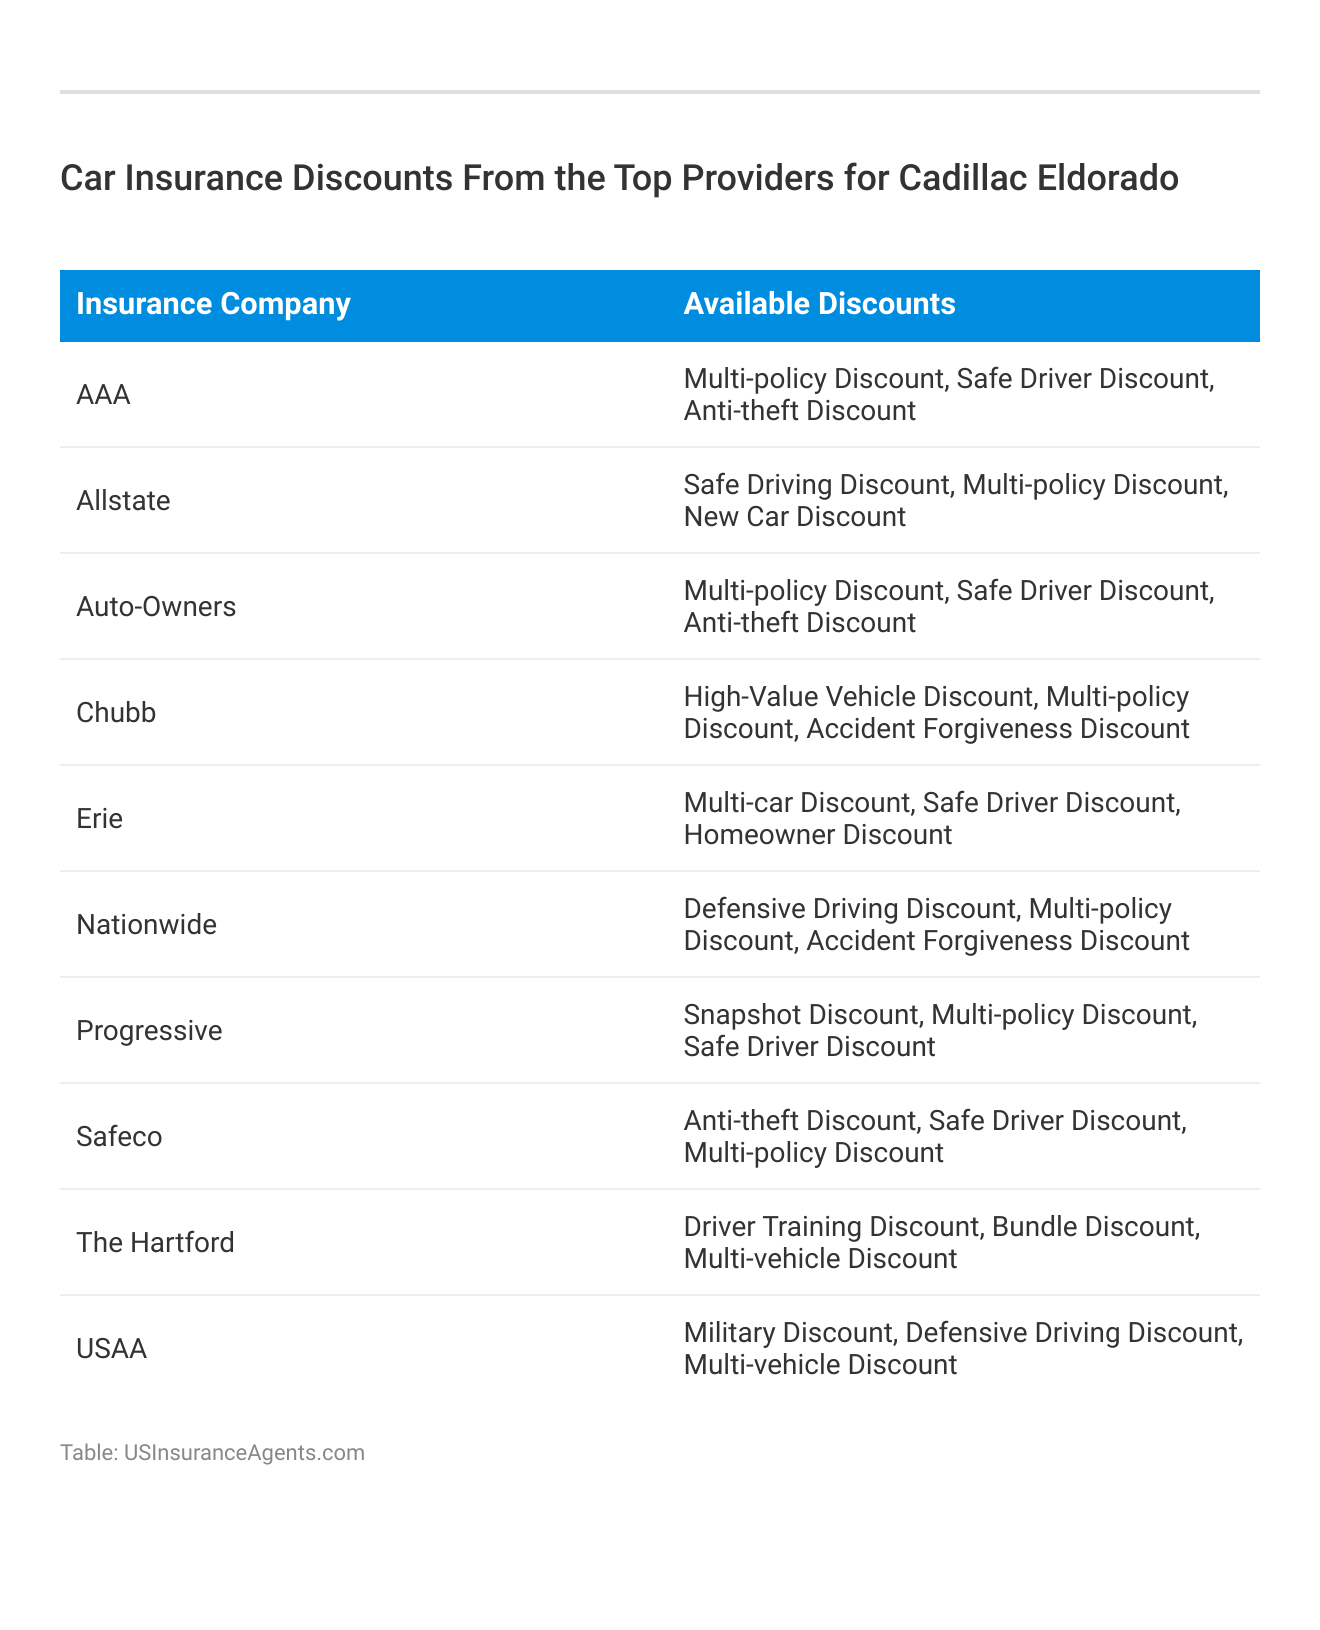 <h3>Car Insurance Discounts From the Top Providers for Cadillac Eldorado</h3>